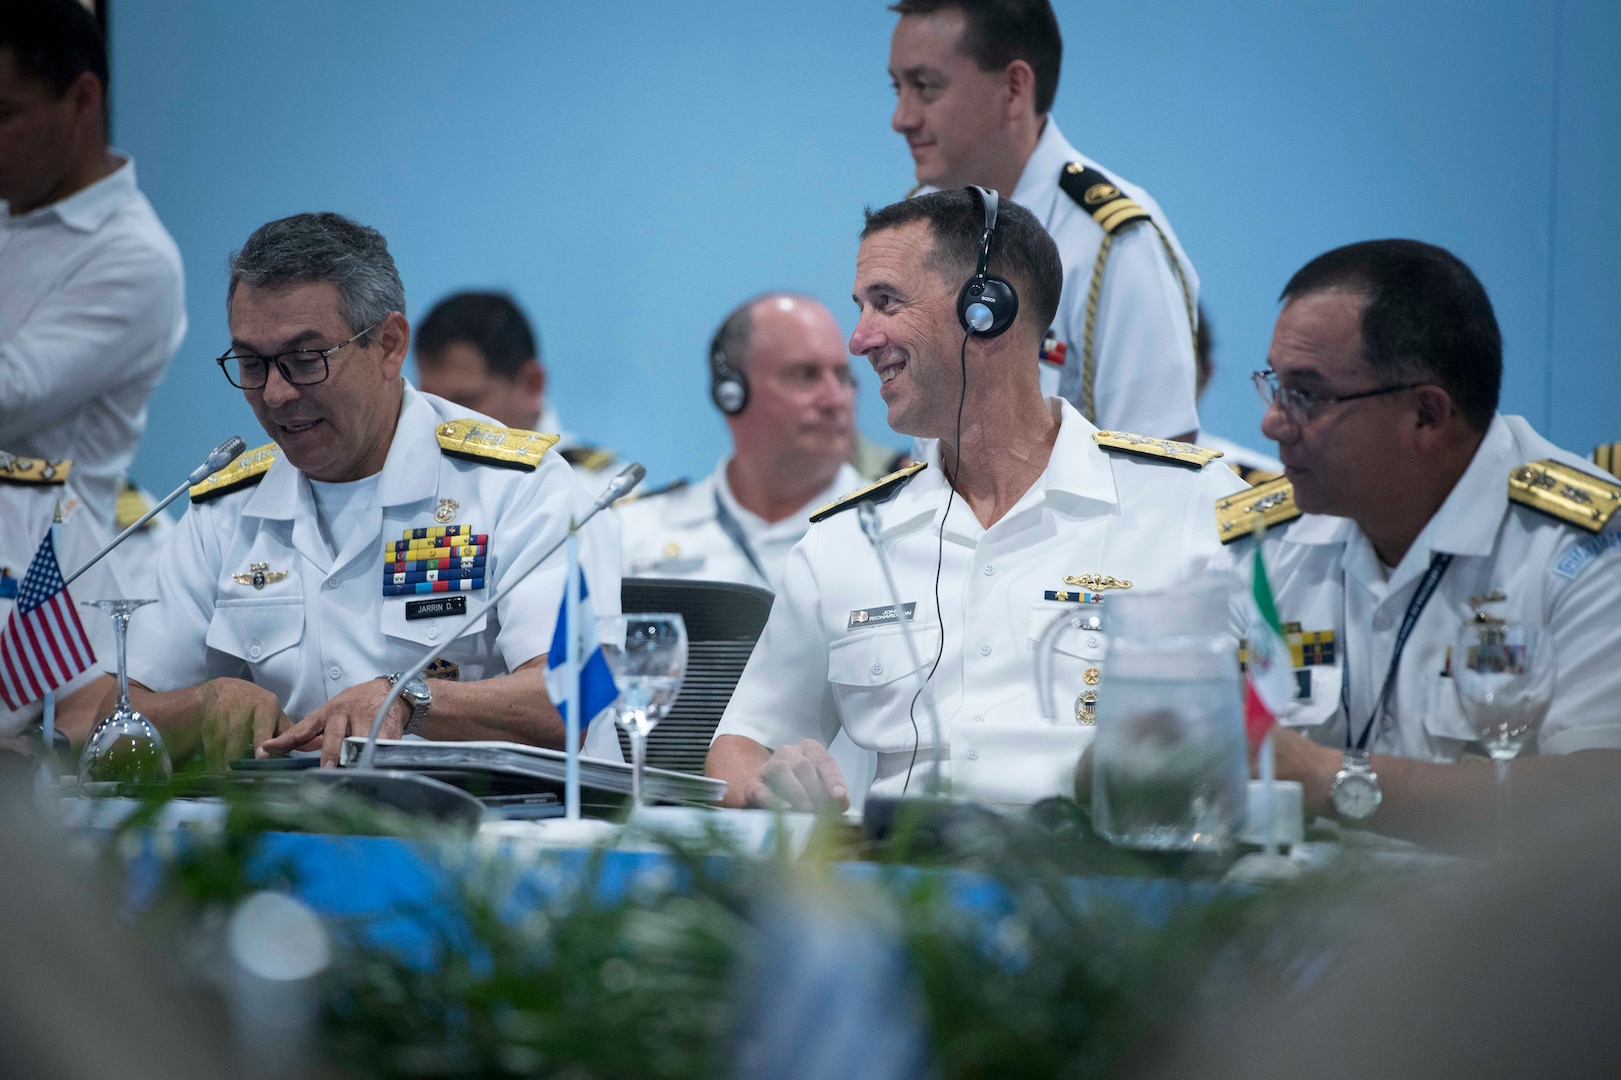 Navy Adm. John M. Richardson, the chief of naval operations, middle, highlighted the Navy’s commitment to its allies and partners during his remarks at the 28th Inter-American Naval Conference in Cartagena, Colombia.